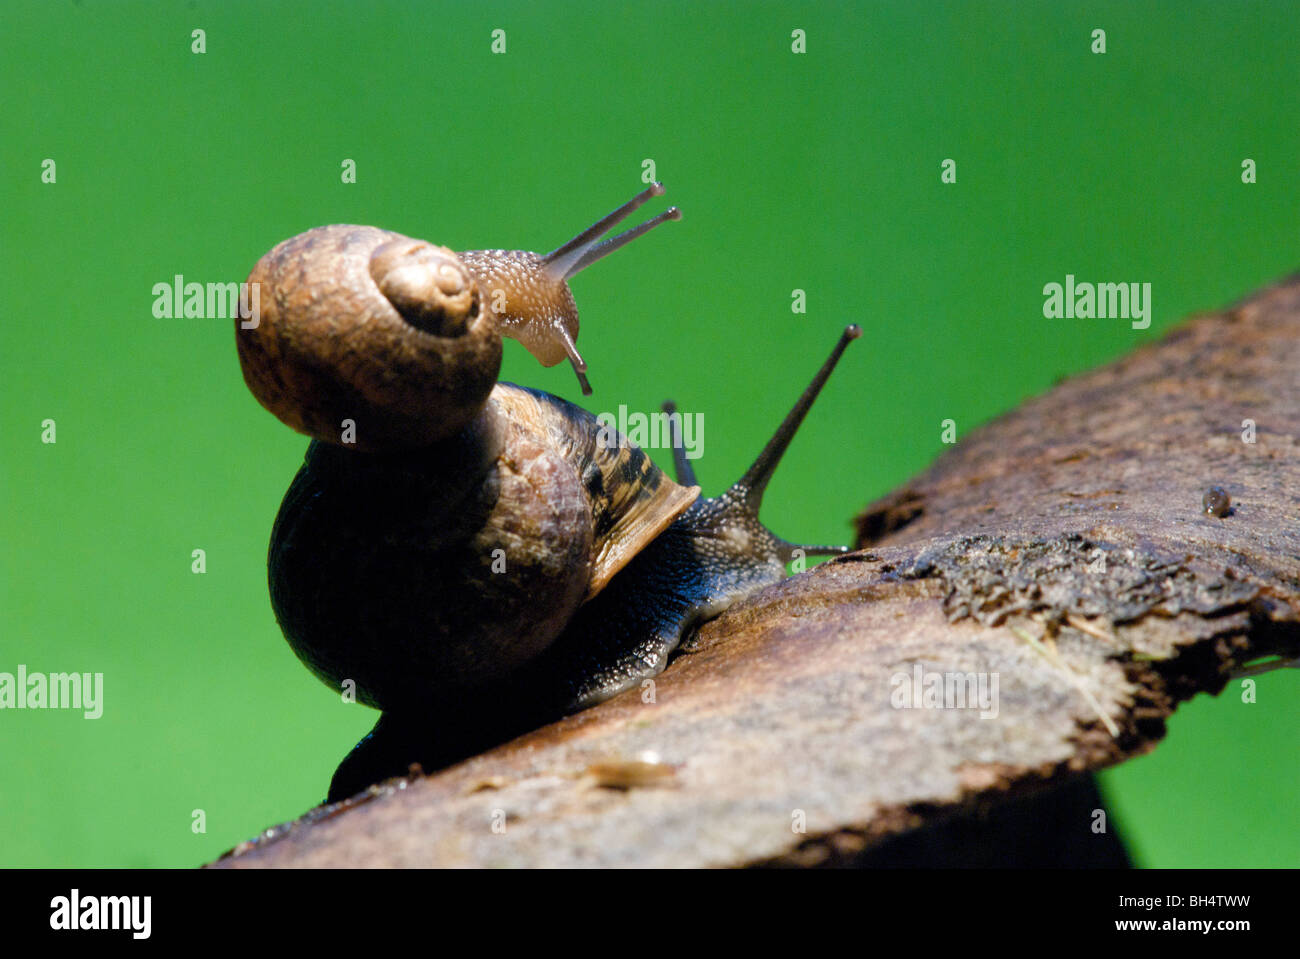 Two common snails (Helix aspersa) with coiled shell on a piece of tree bark with clear visible straight tentacles. Stock Photo